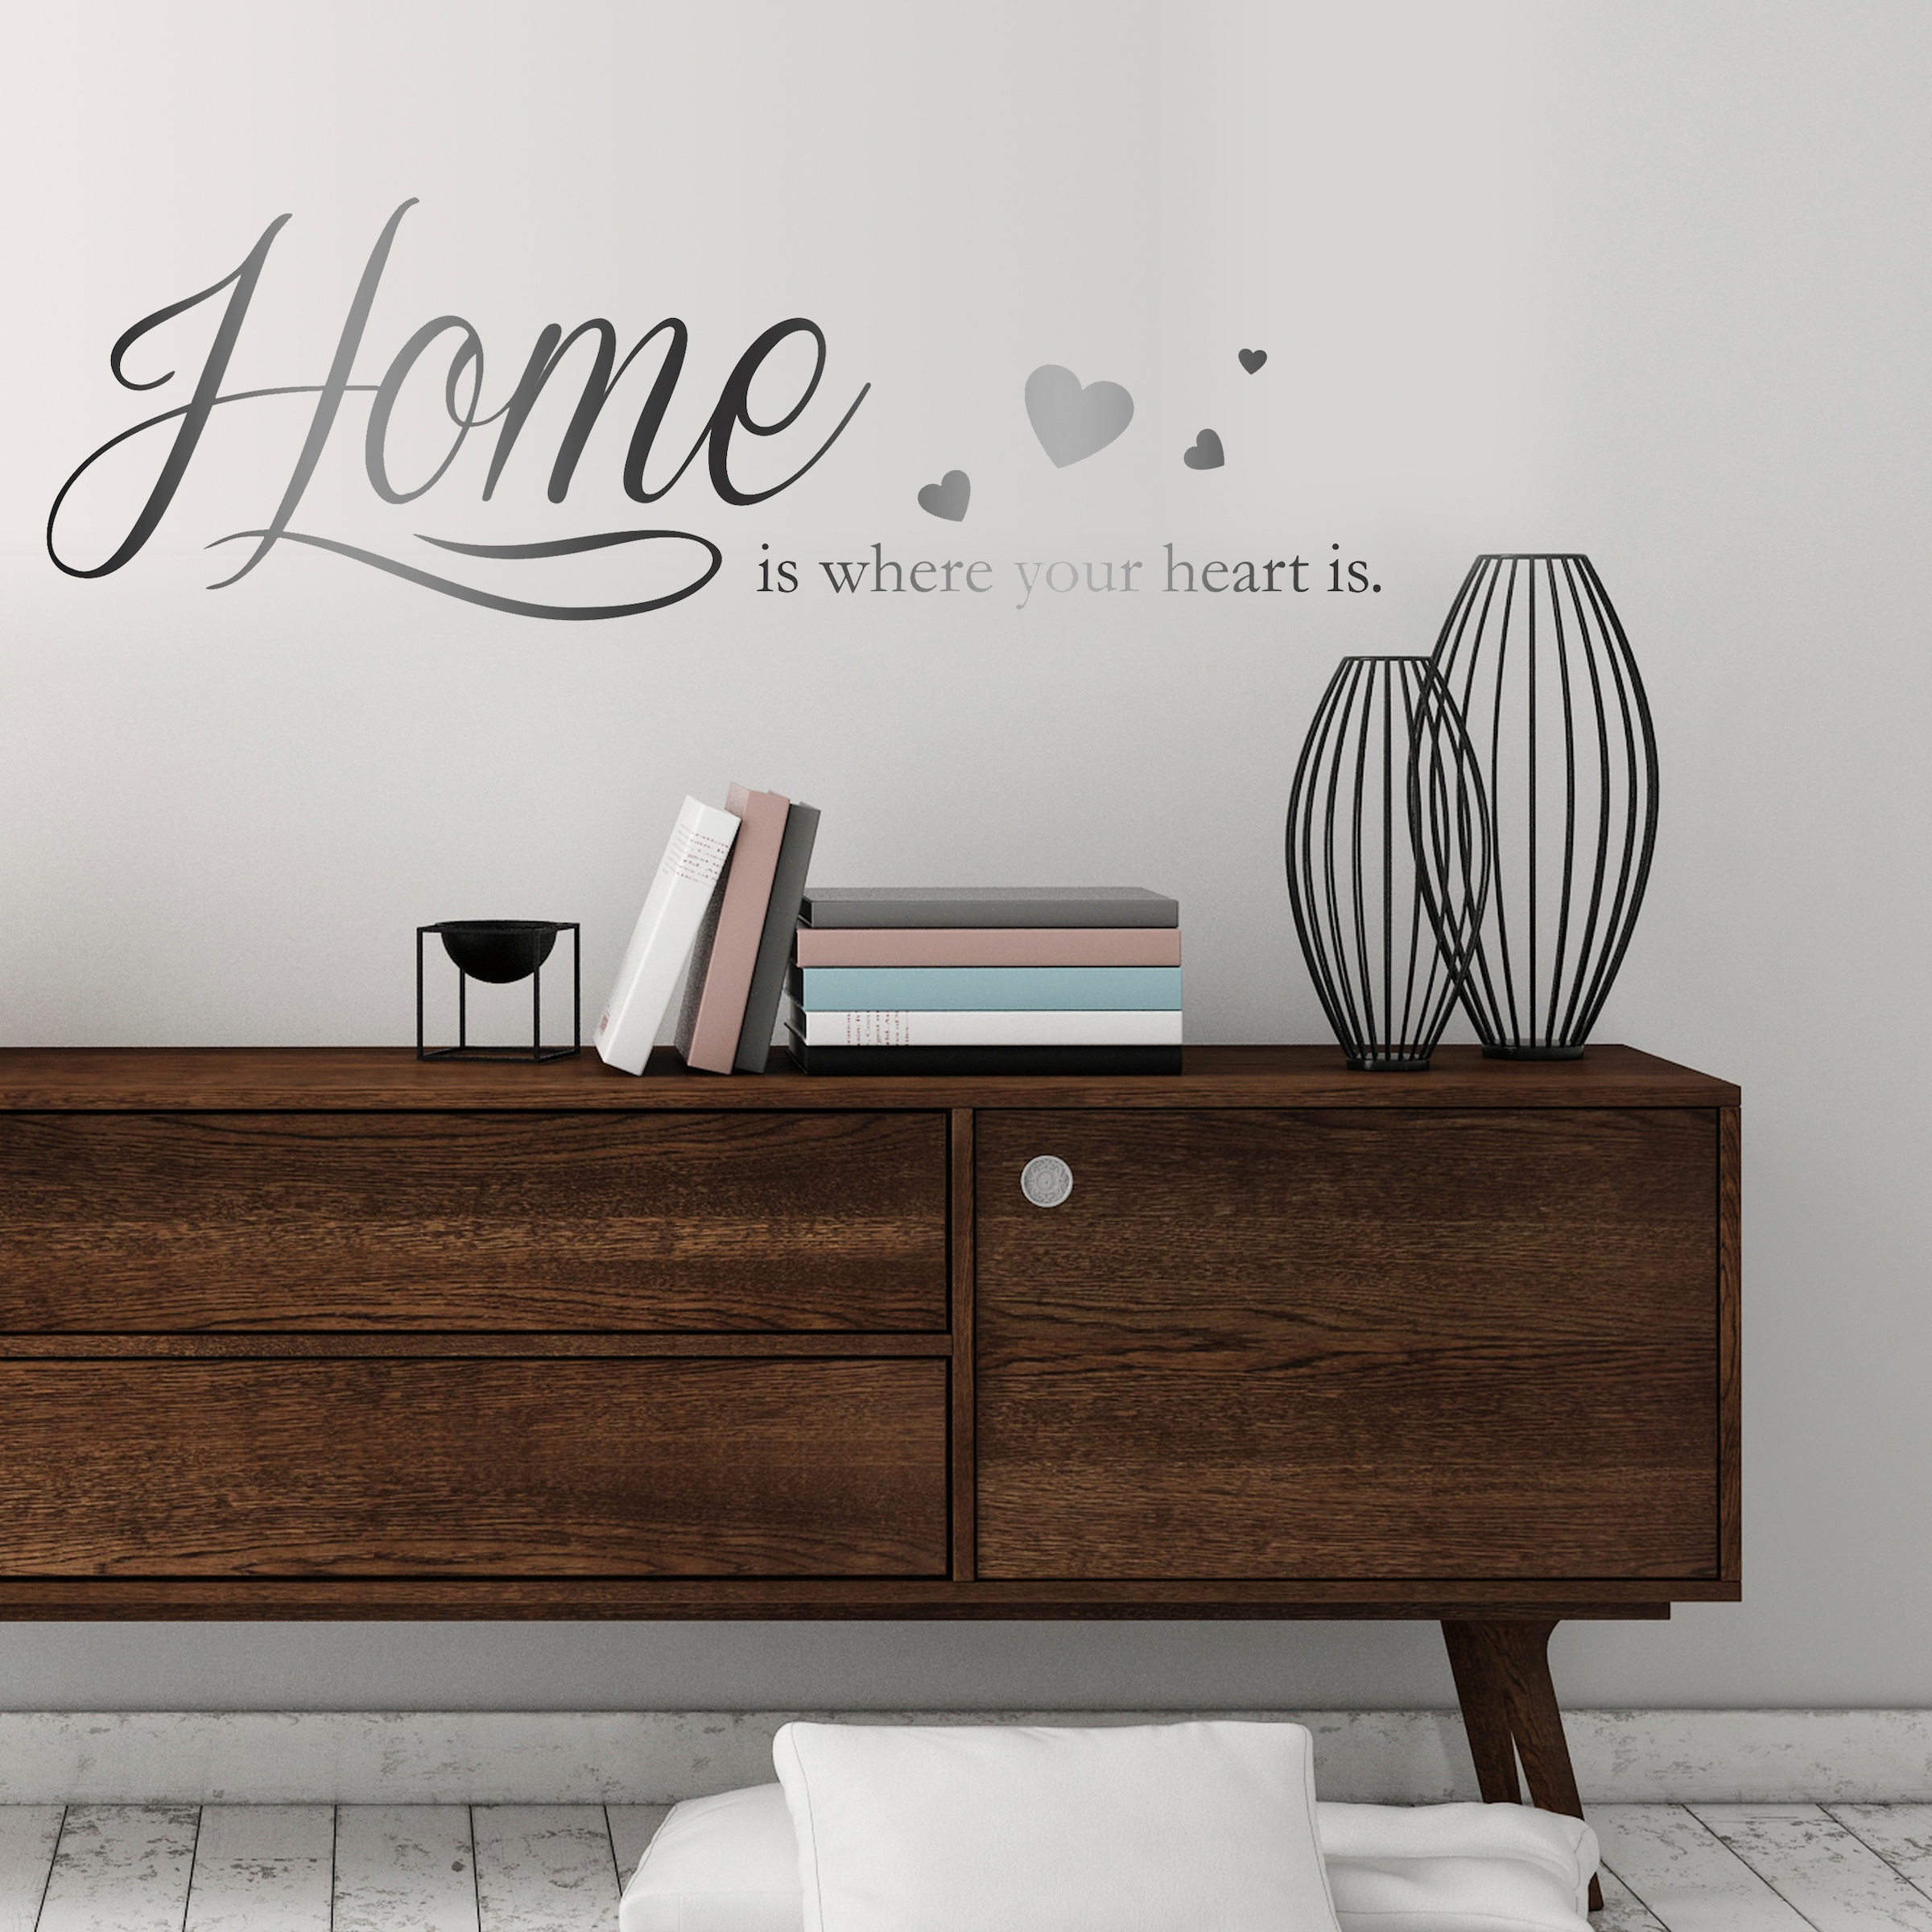 cm is«, is 30 | BAUR queence x »Home kaufen 120 your Wandtattoo heart where